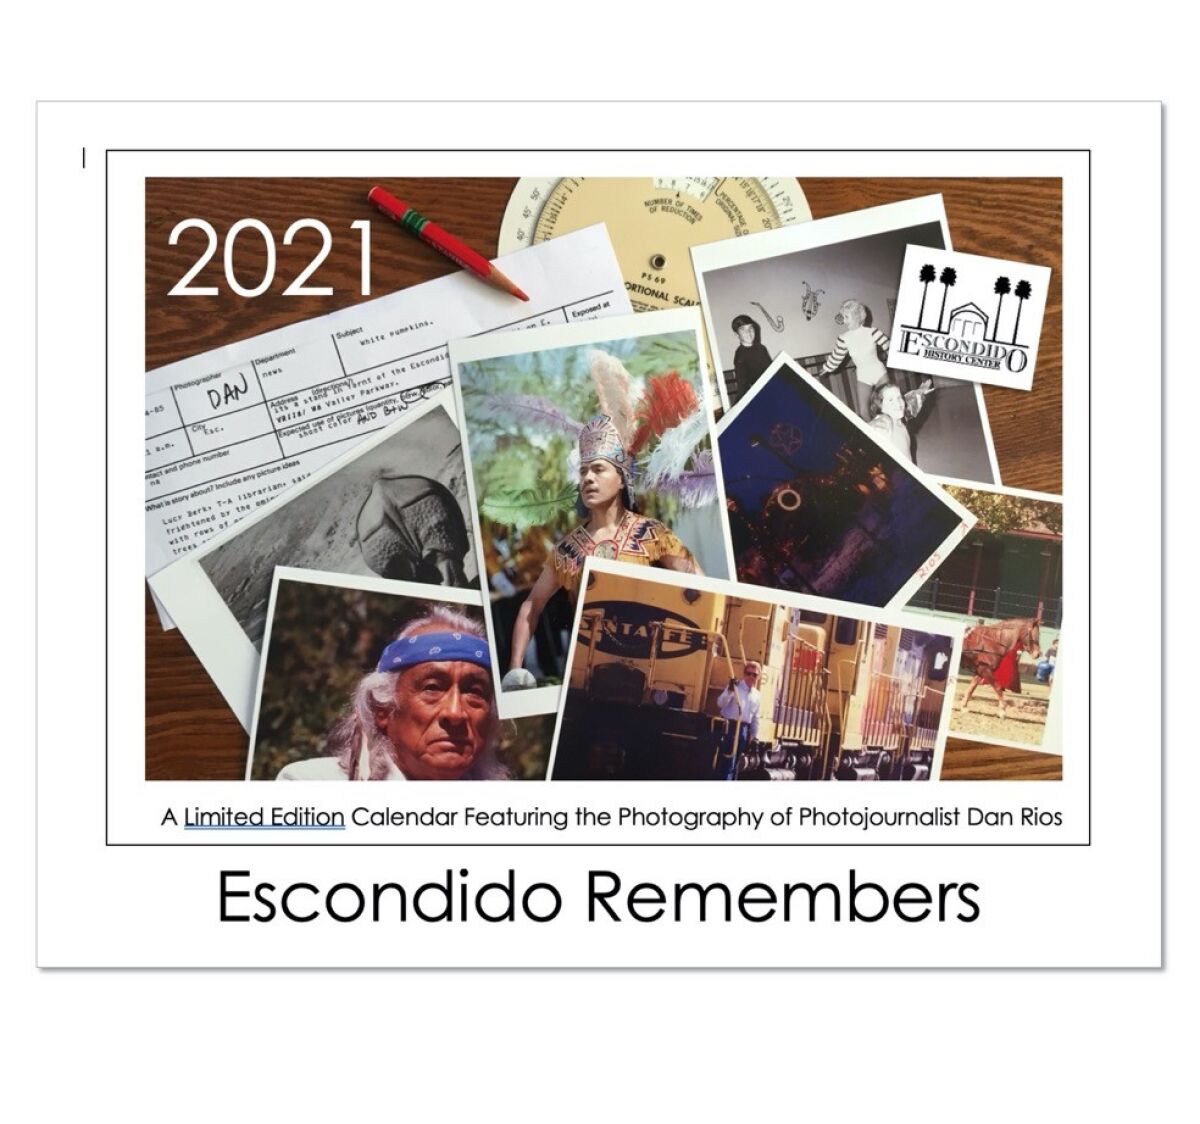 The cover of the Escondido History Center calendar features the work of photojournalist Dan Rios.